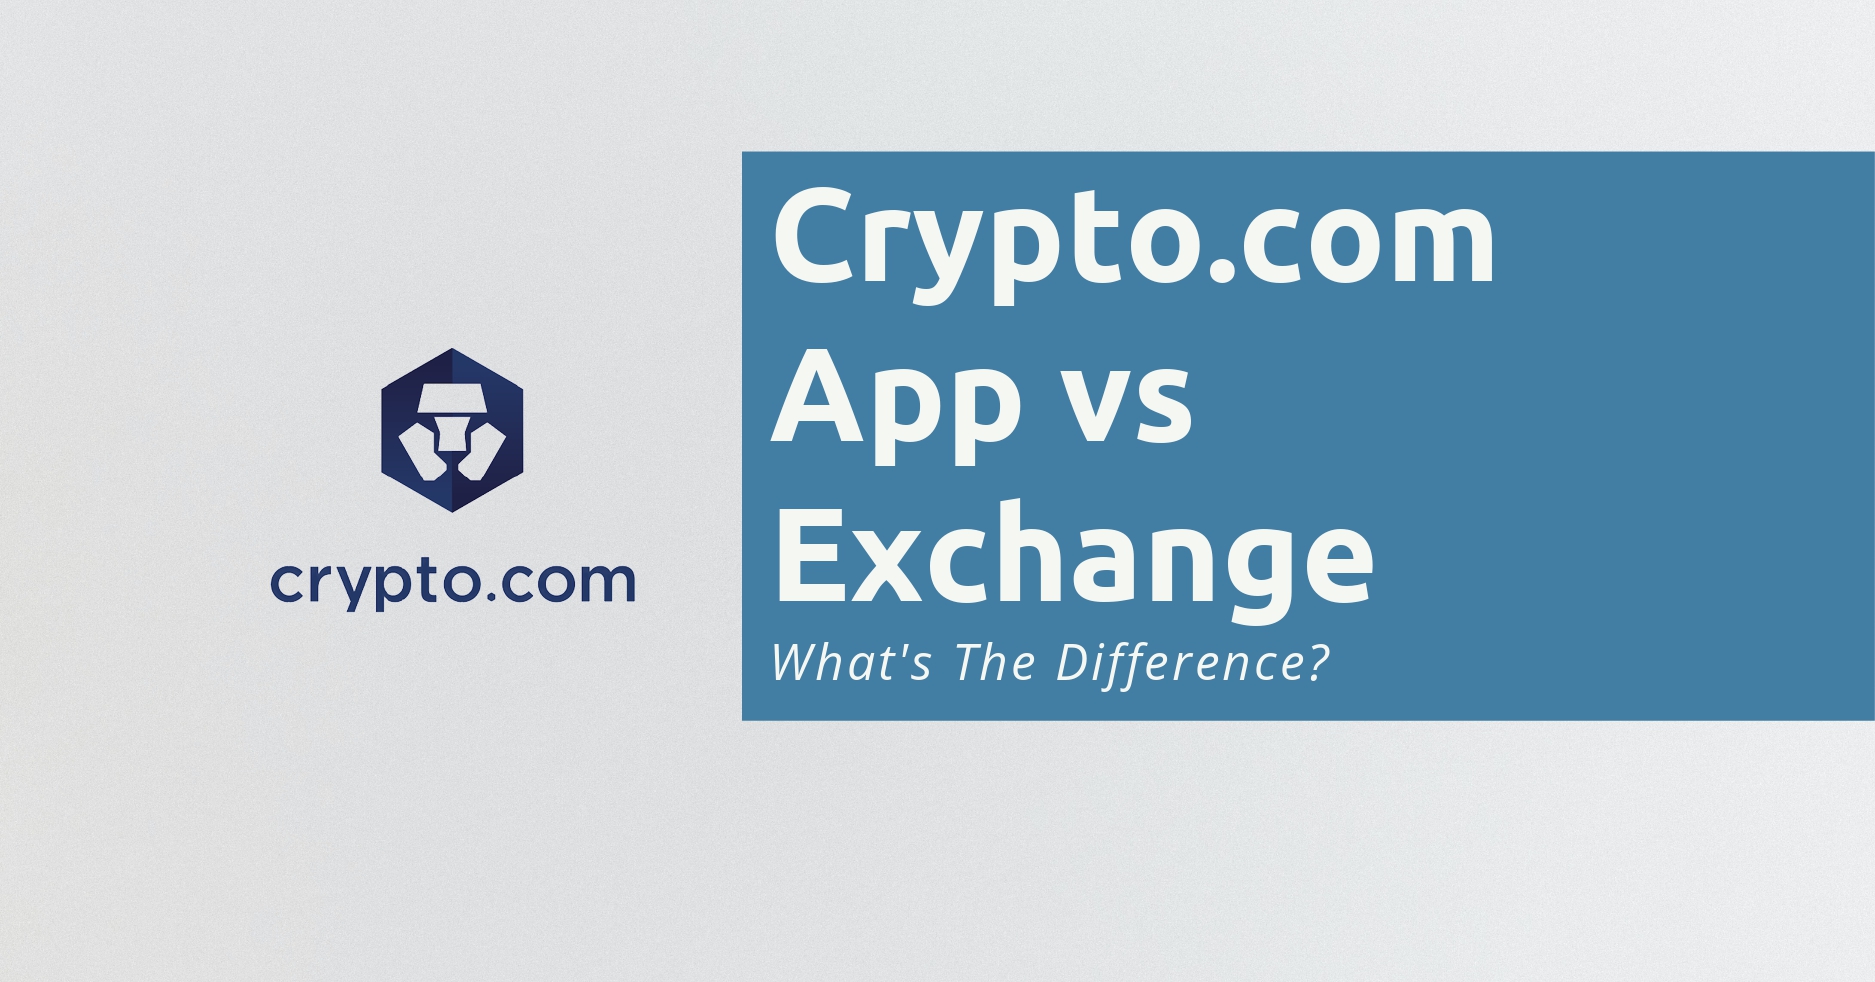 whats the difference between crypto.com app and exchange